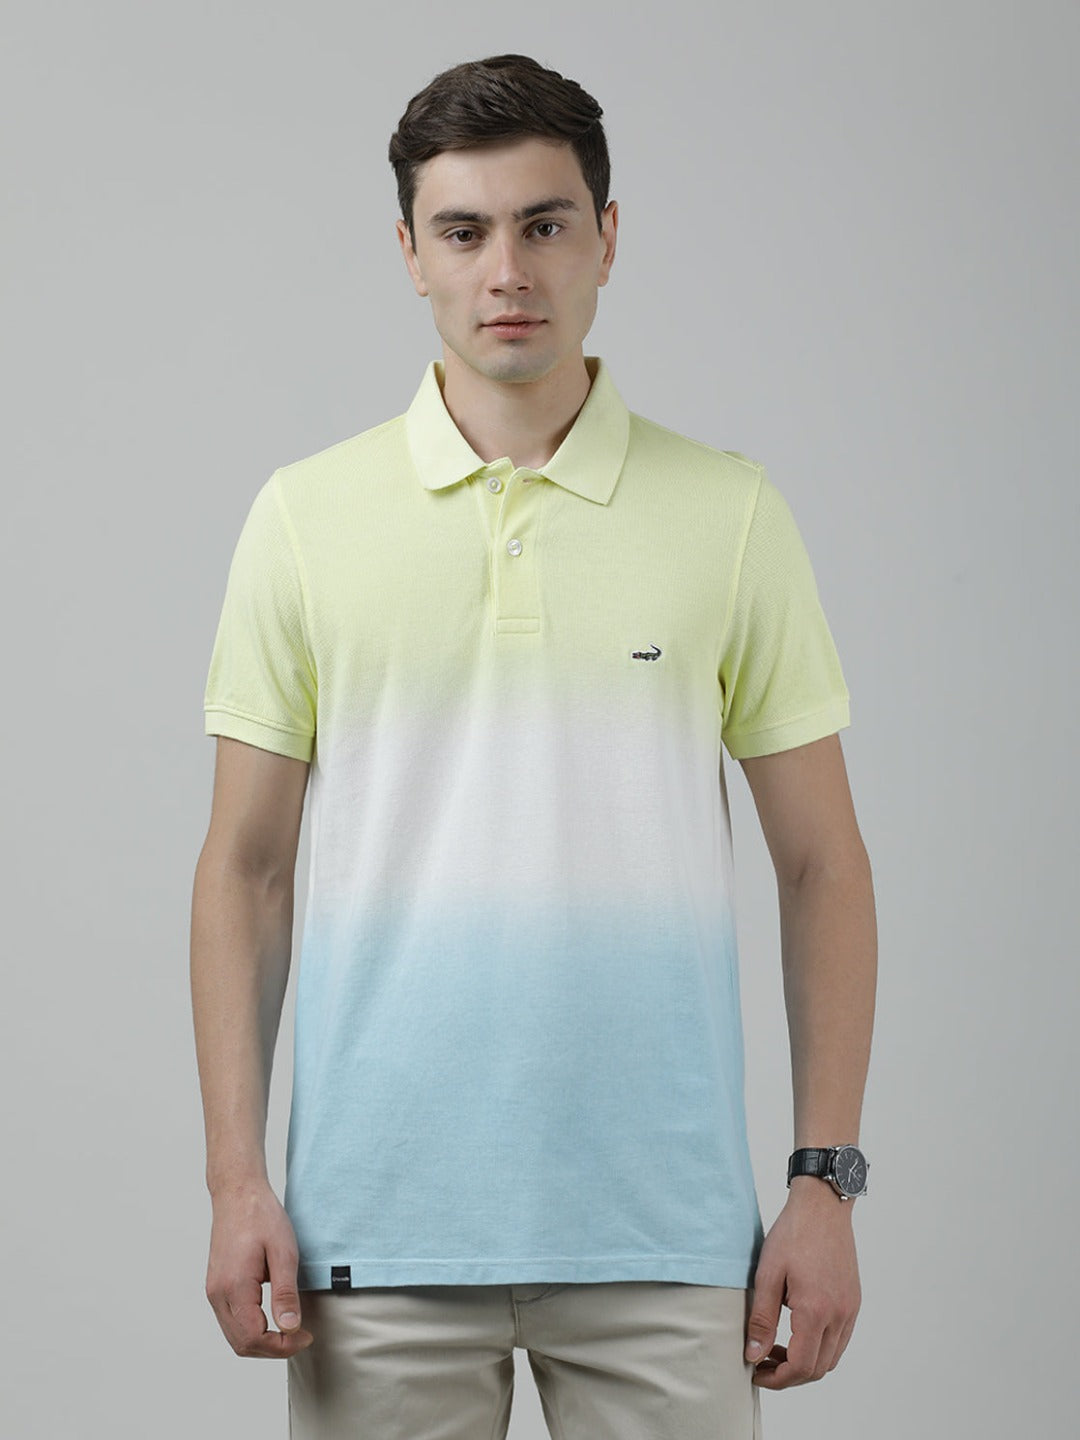 Casual Yellow T-Shirt Half Sleeve Slim Fit with Collar for Men